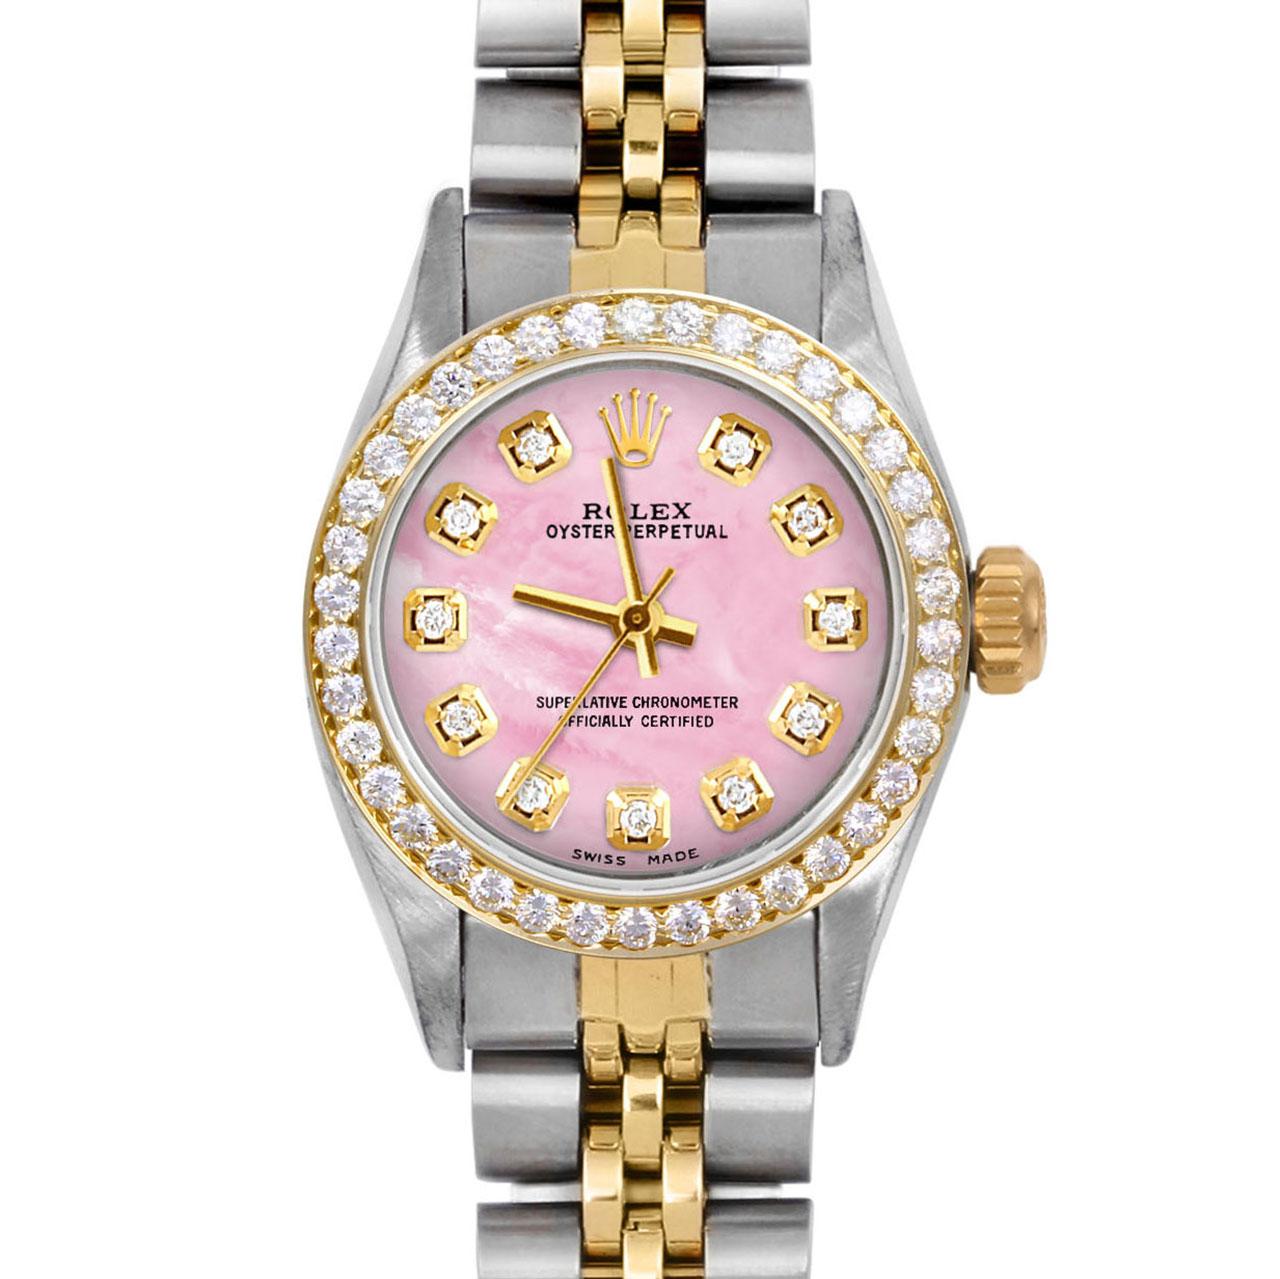 Brand : Rolex
Model : Oyster Perpetual 
Gender : Ladies
Metals : 14K Yellow Gold / Stainless Steel
Case Size : 24 mm
Dial : Custom Pink Mother Of Pearl Diamond Dial (This dial is not original Rolex And has been added aftermarket yet is a beautiful